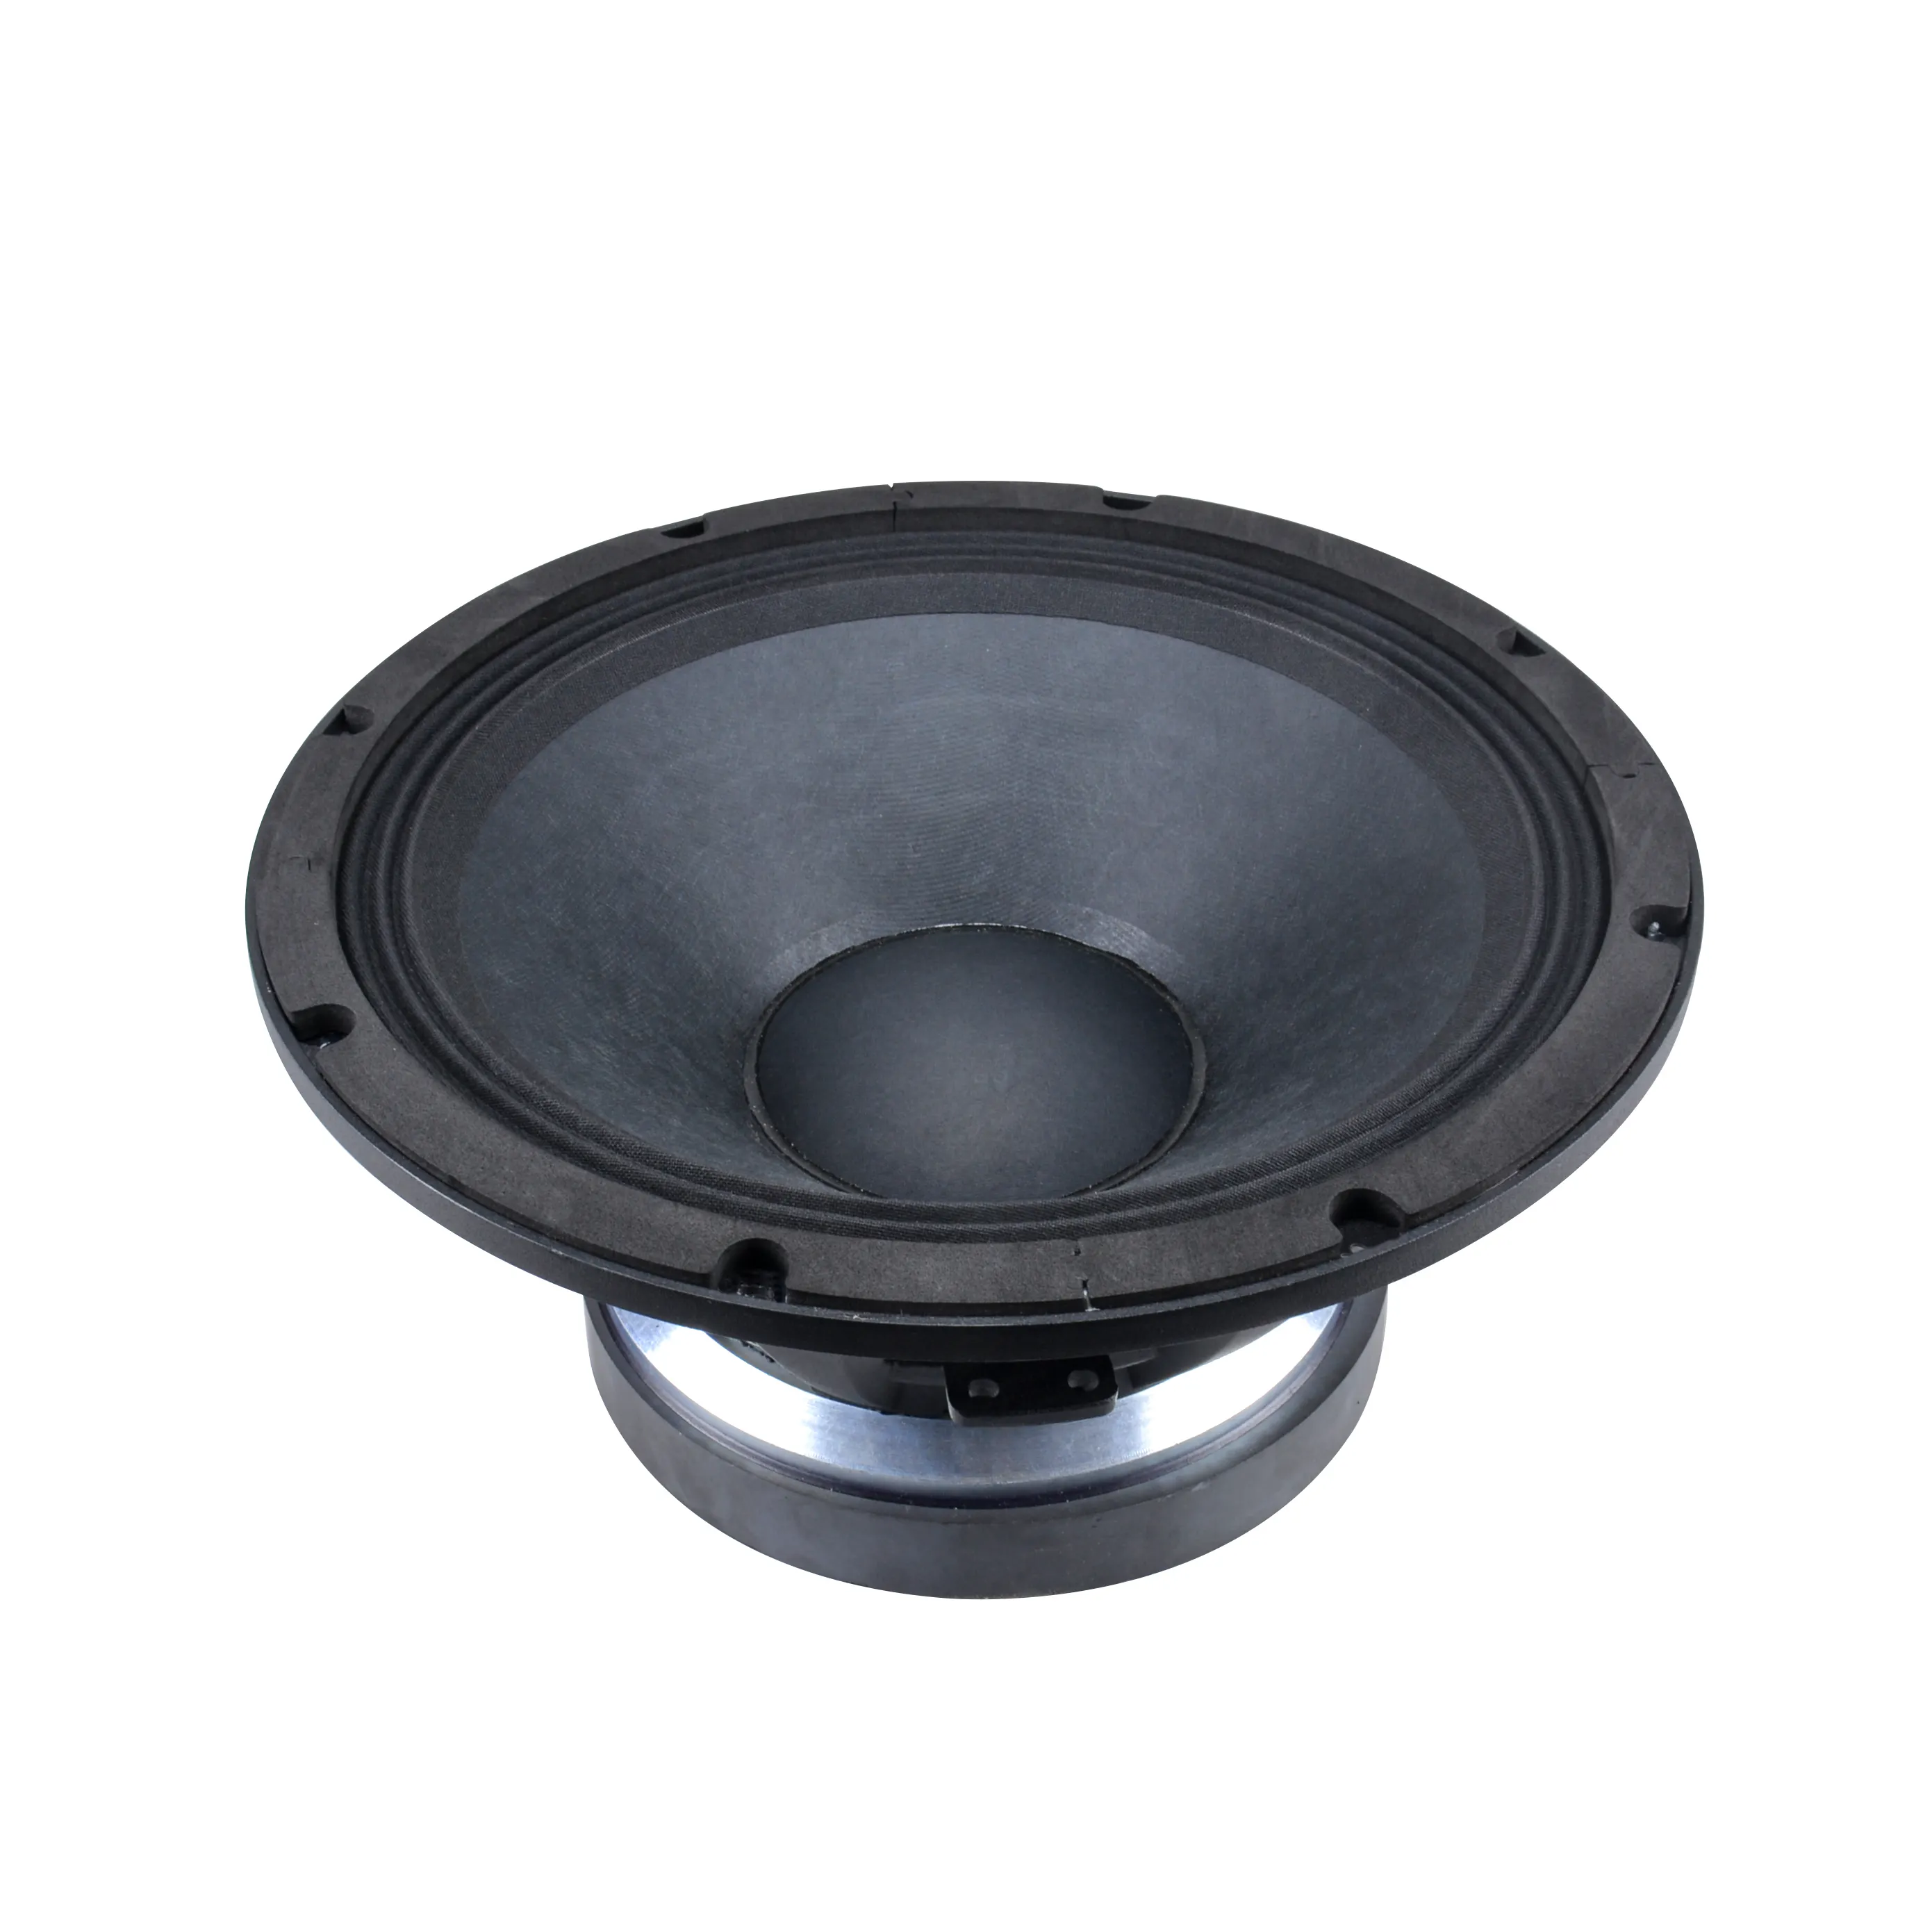 12 inch subwoofer audio speakers professional subwoofer for car soway SW-1290PA Hot Selling Good Quality New Fashion